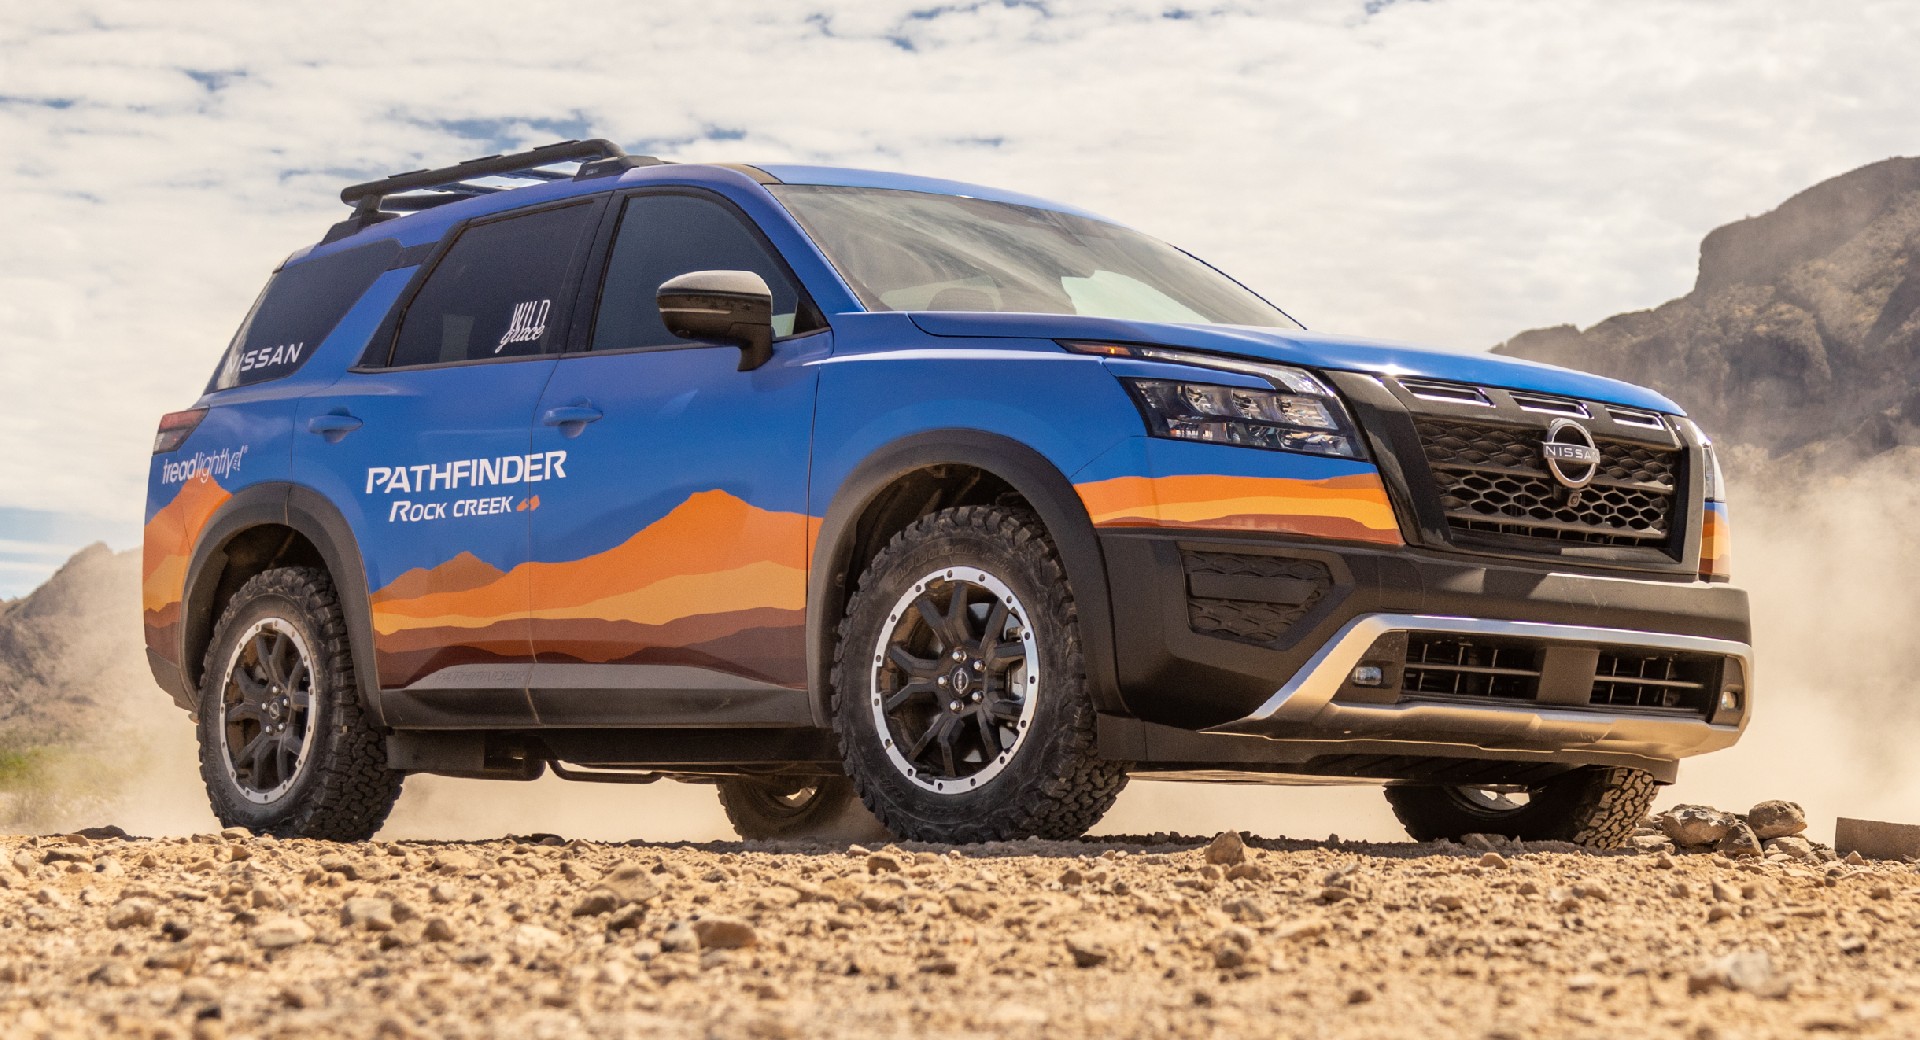 Nissan Pathfinder Rock Creek Enters The Rebelle Rally With Contrasting